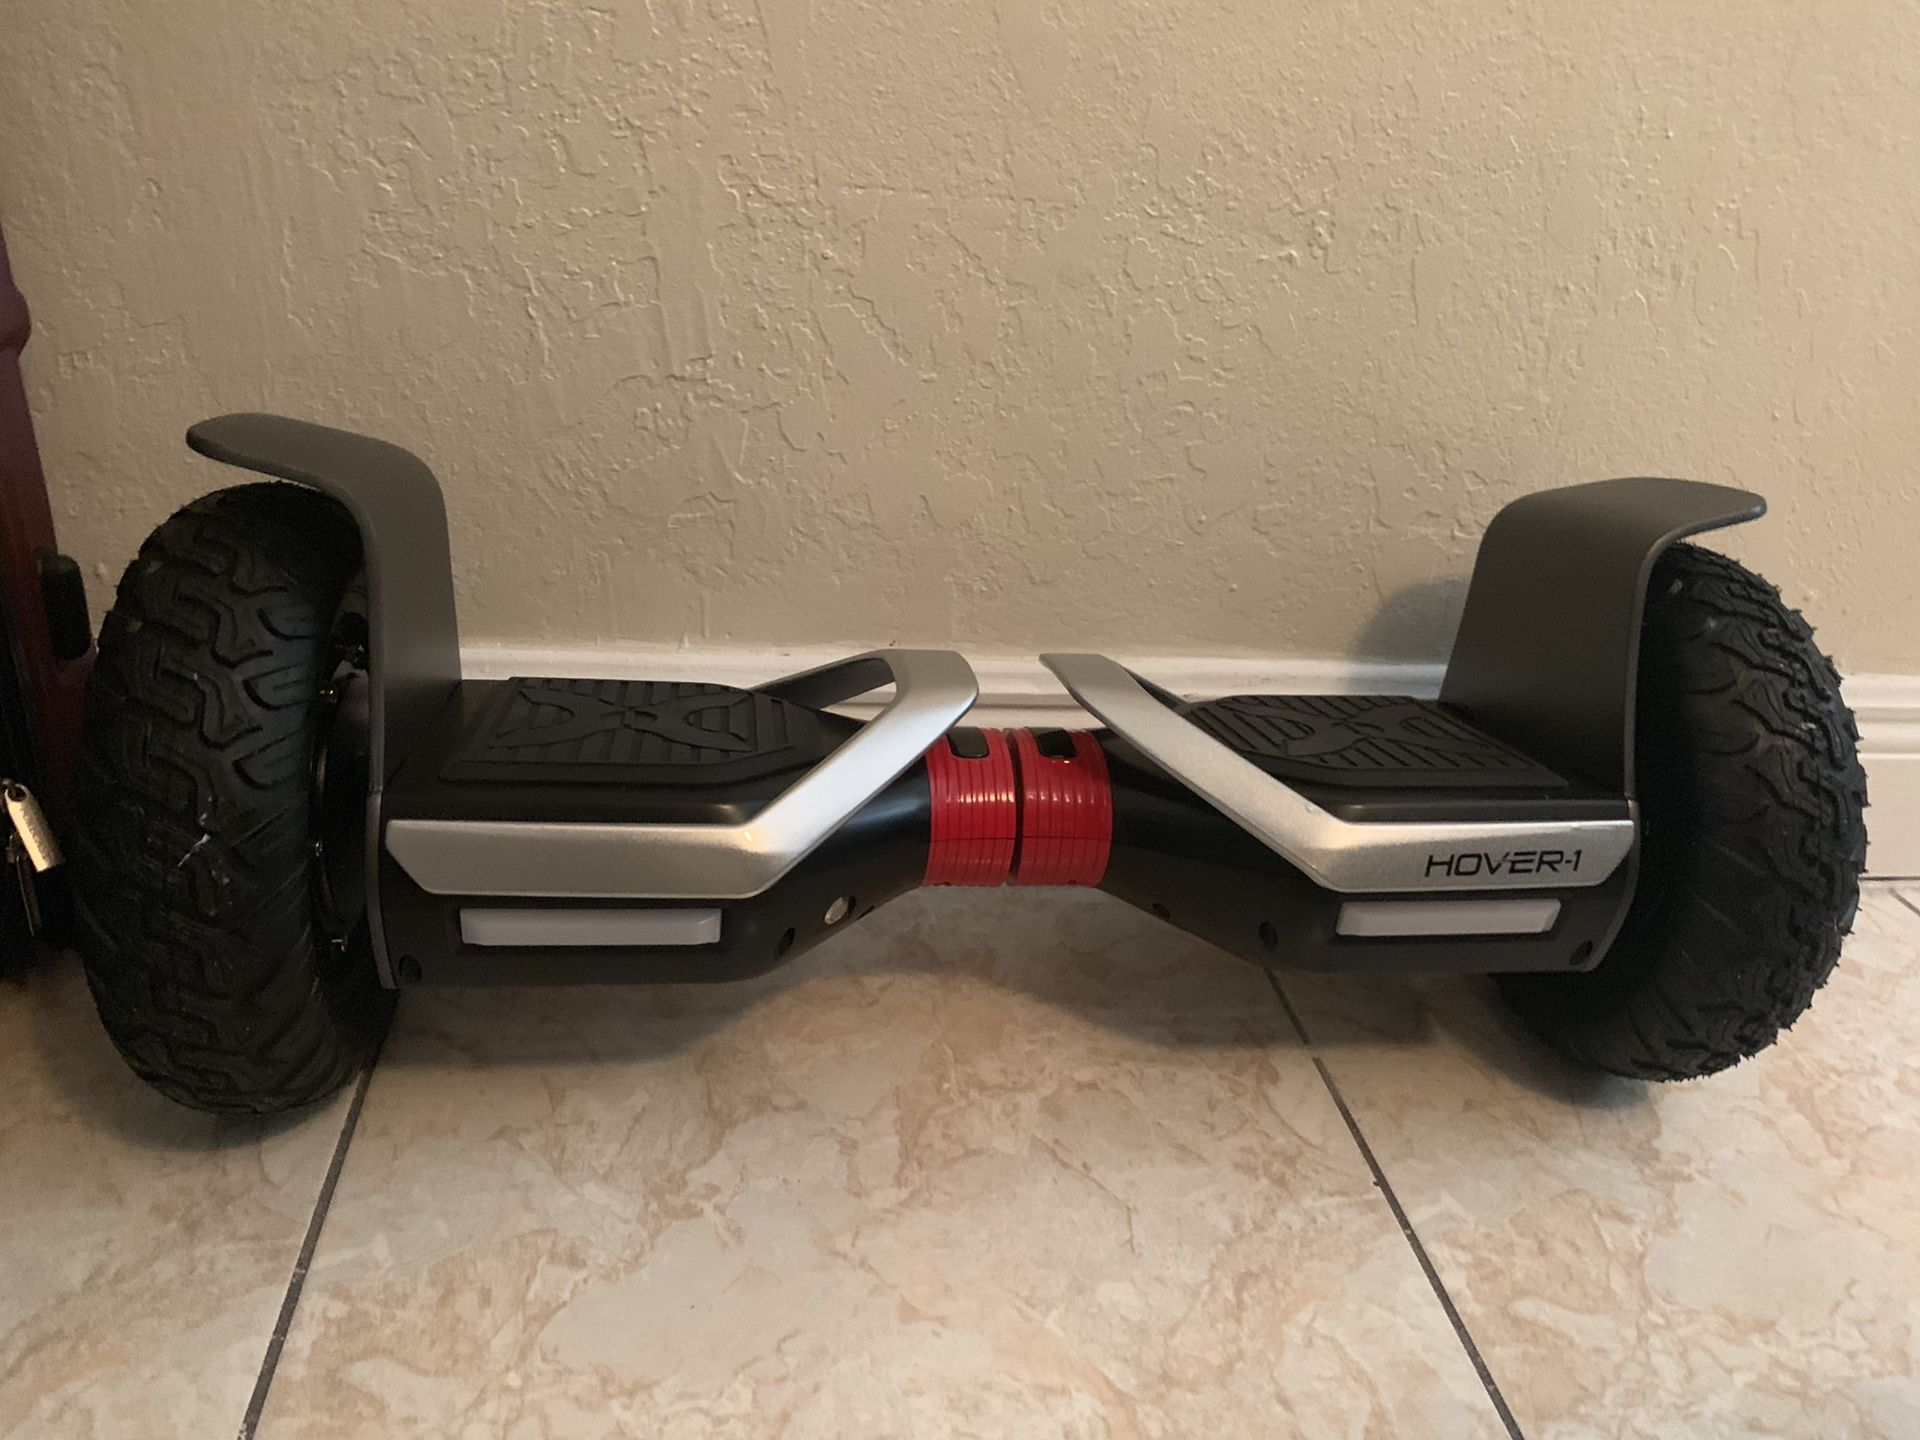 HOVER-1 hoverboard BEAST (NEW NEVER USED) W/ Bluetooth